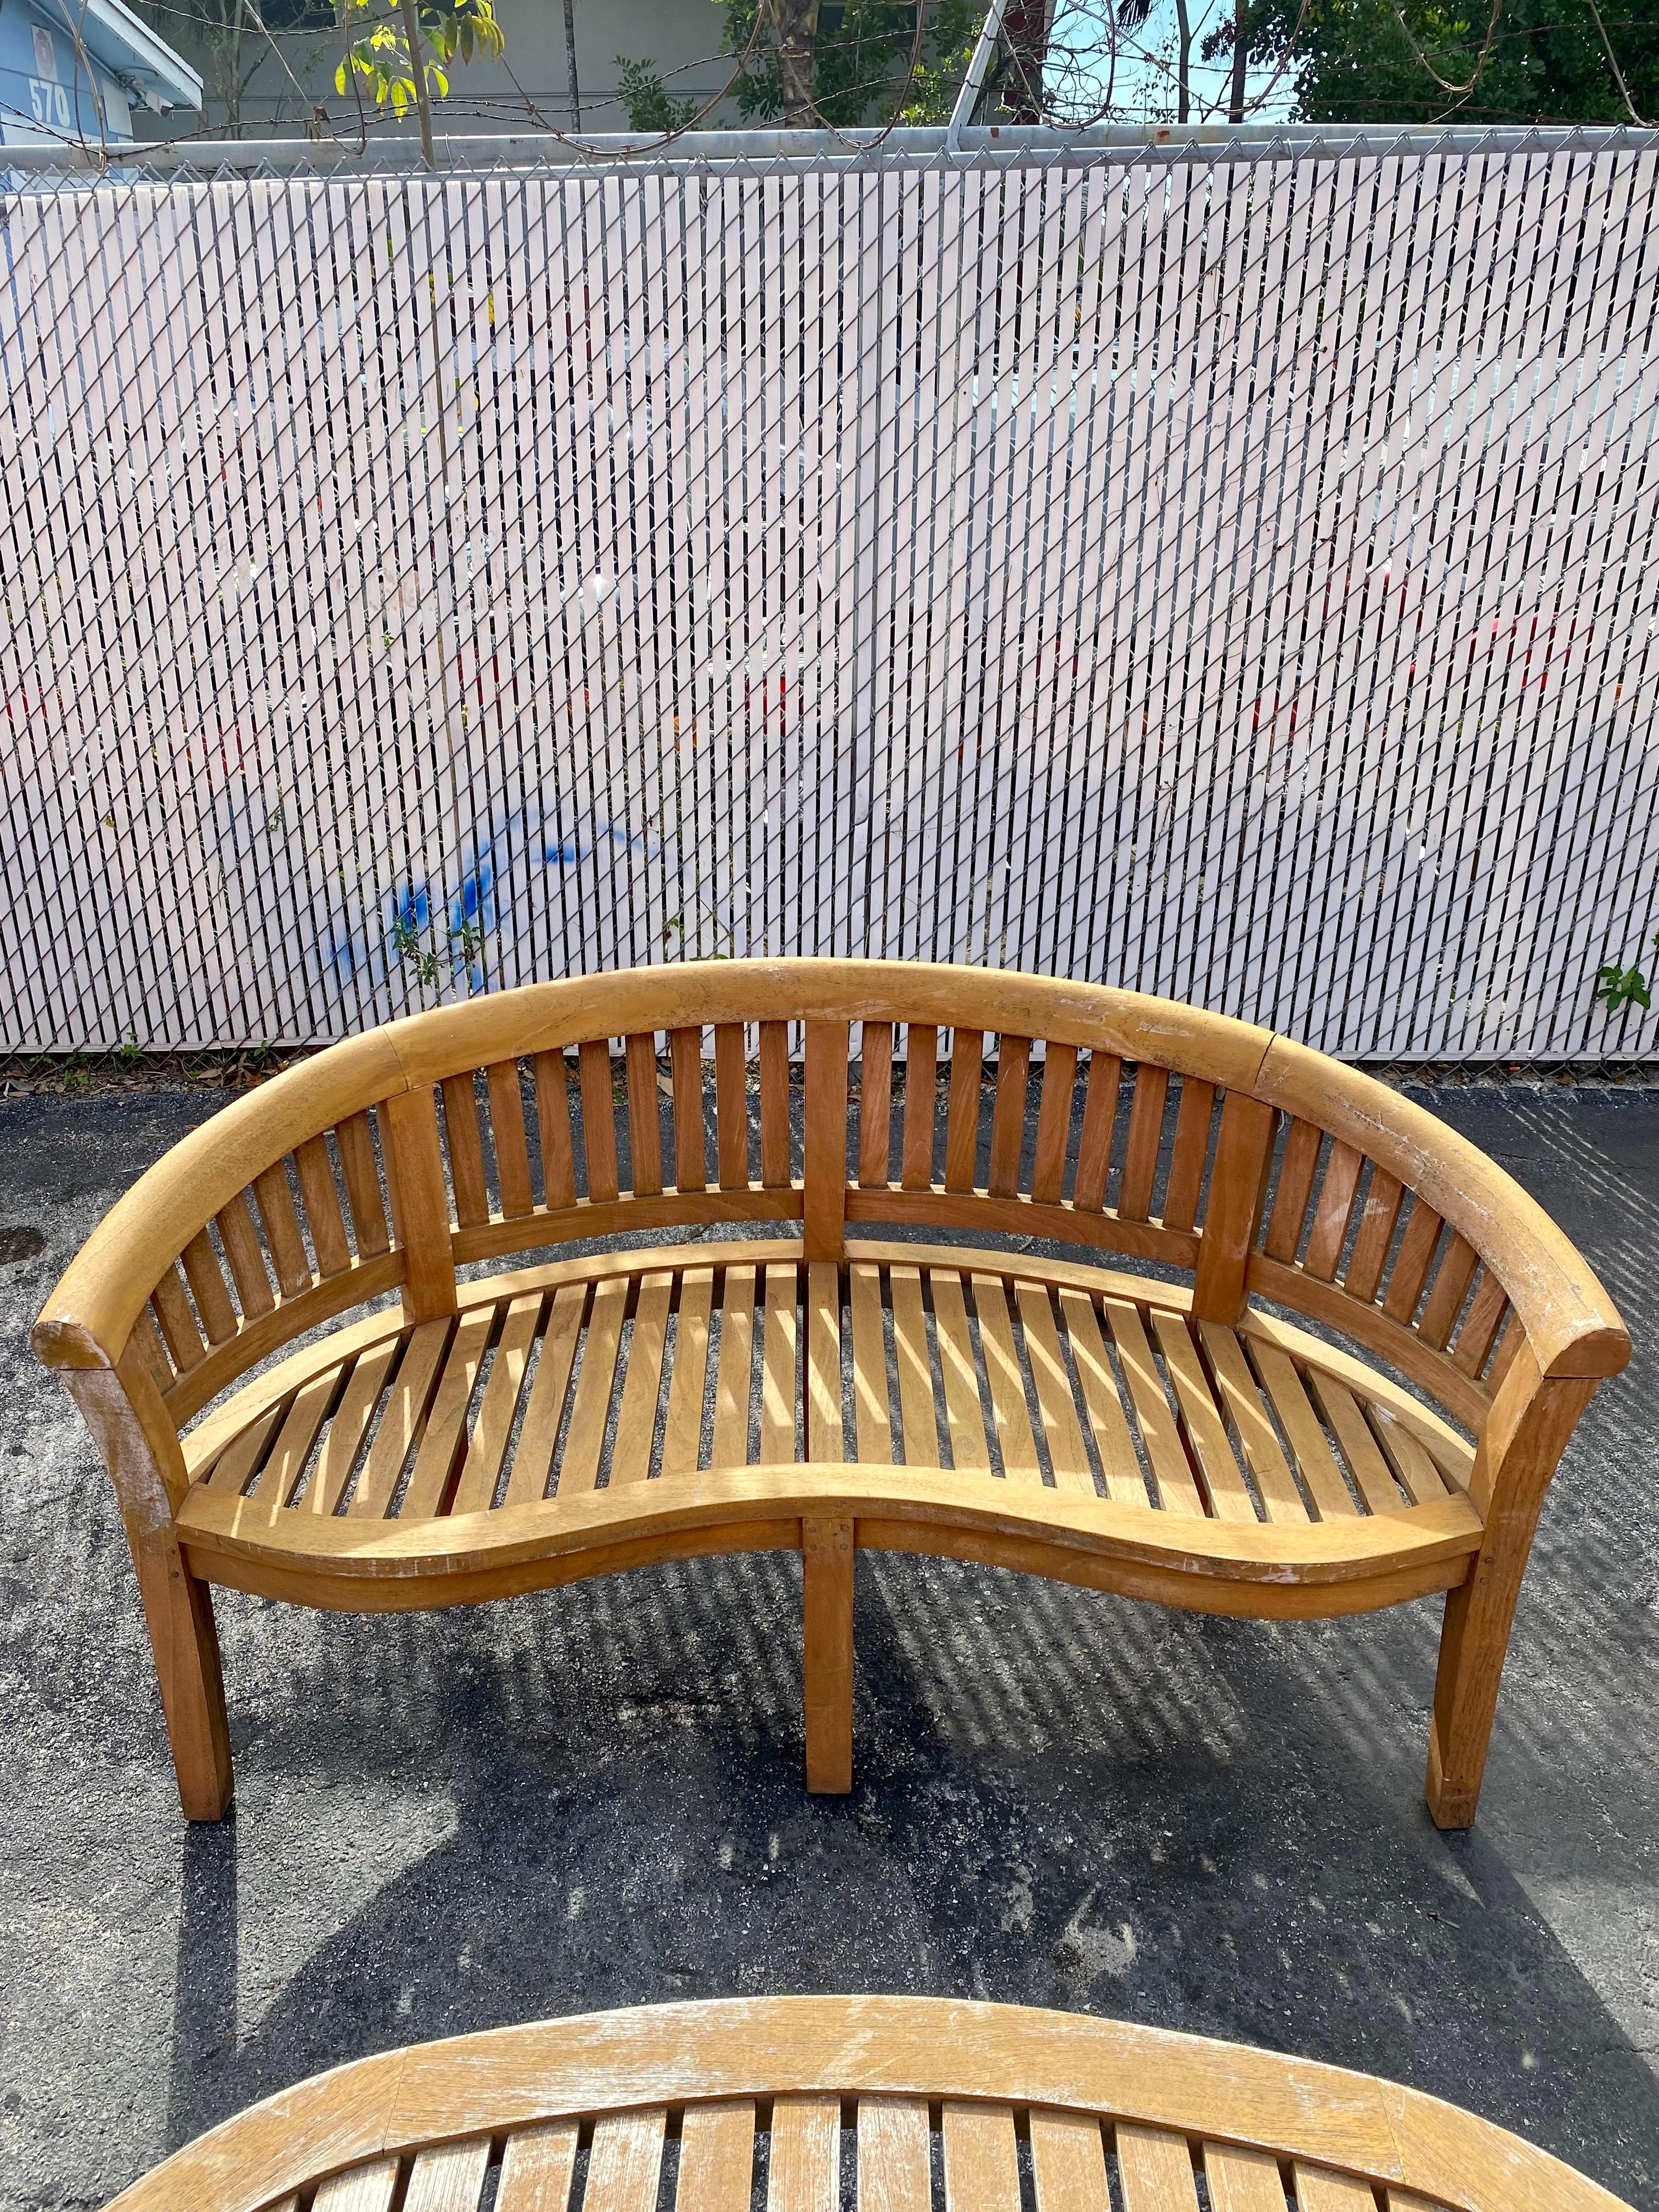 1970s Teak Curved Barrel Kidney Slatted Settee Table Chairs, Set of 4 For Sale 2